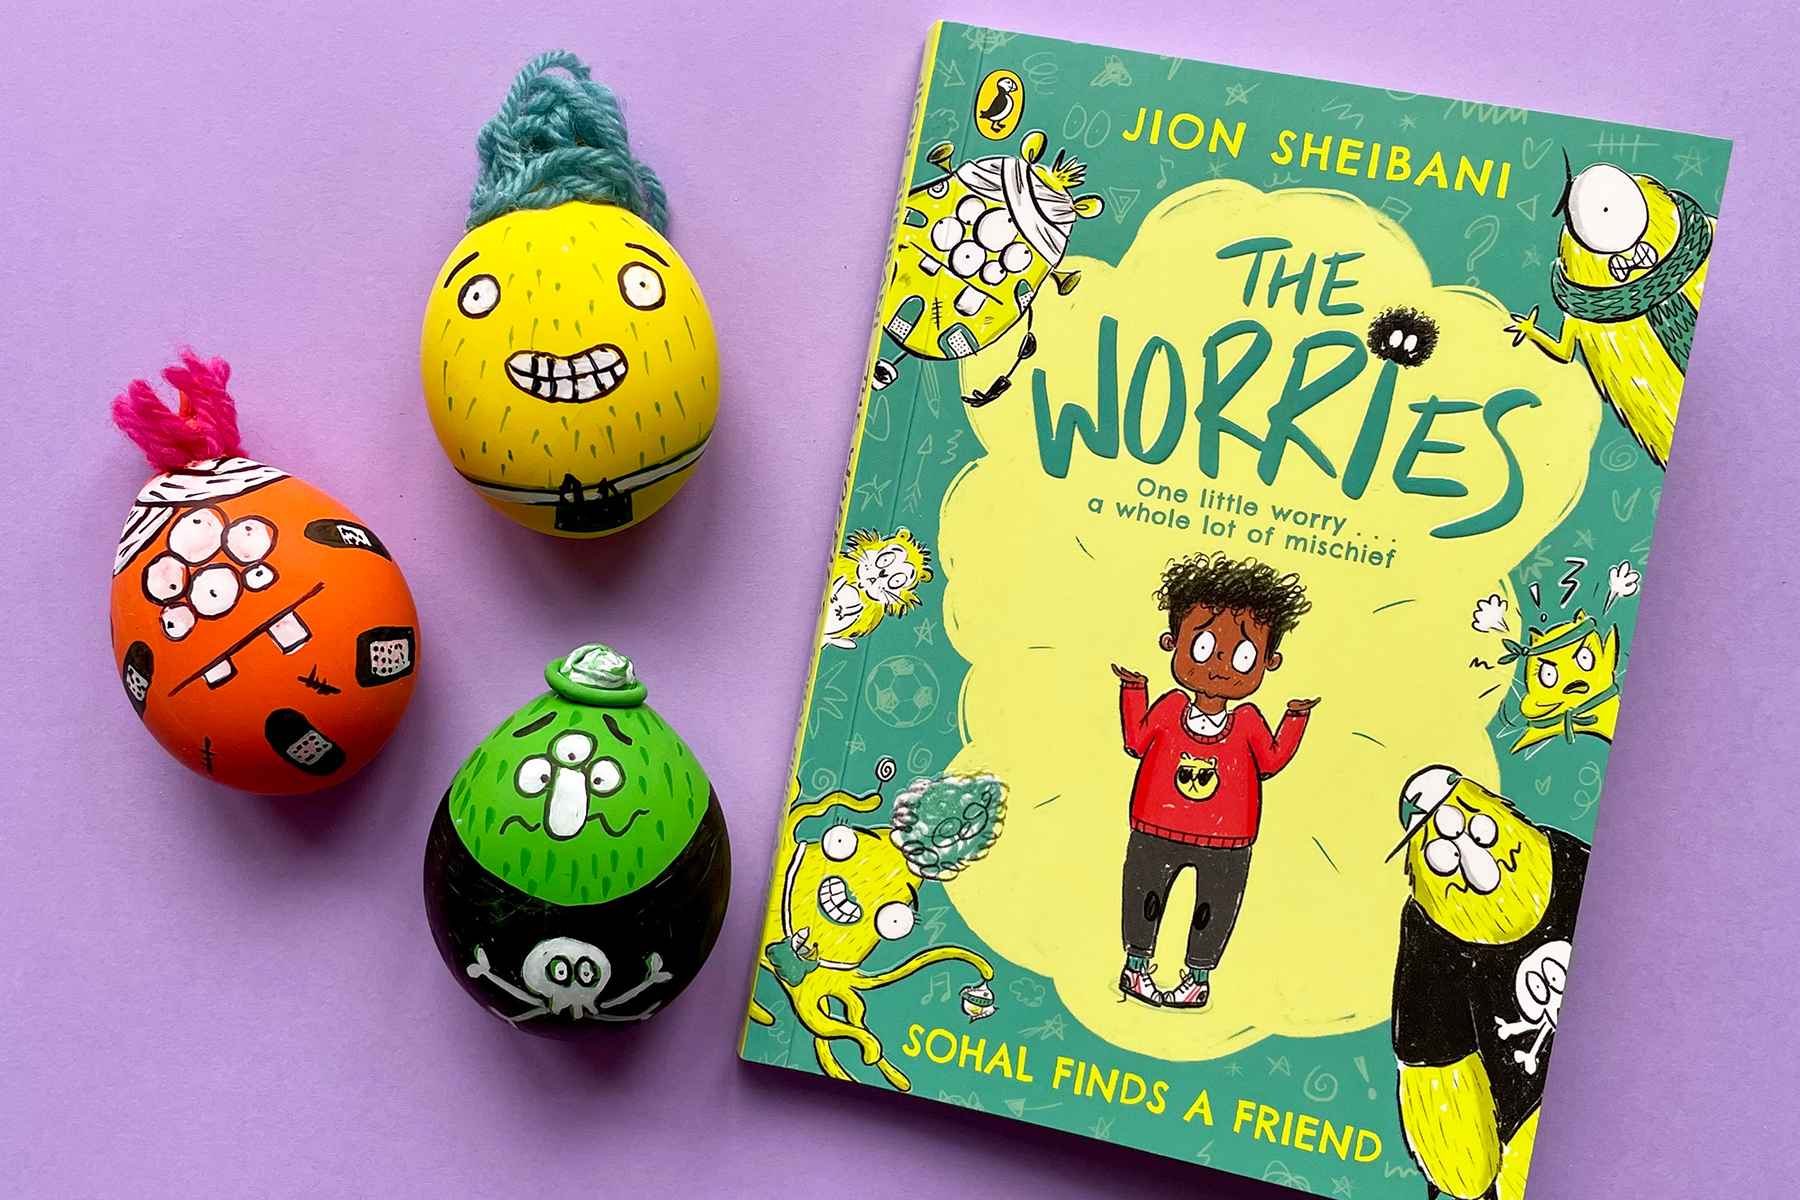 A photo of three stress balls with funny faces inspired by the characters in The Worries by Jion Sheibani; they are next to a copy of the book on a light purple background